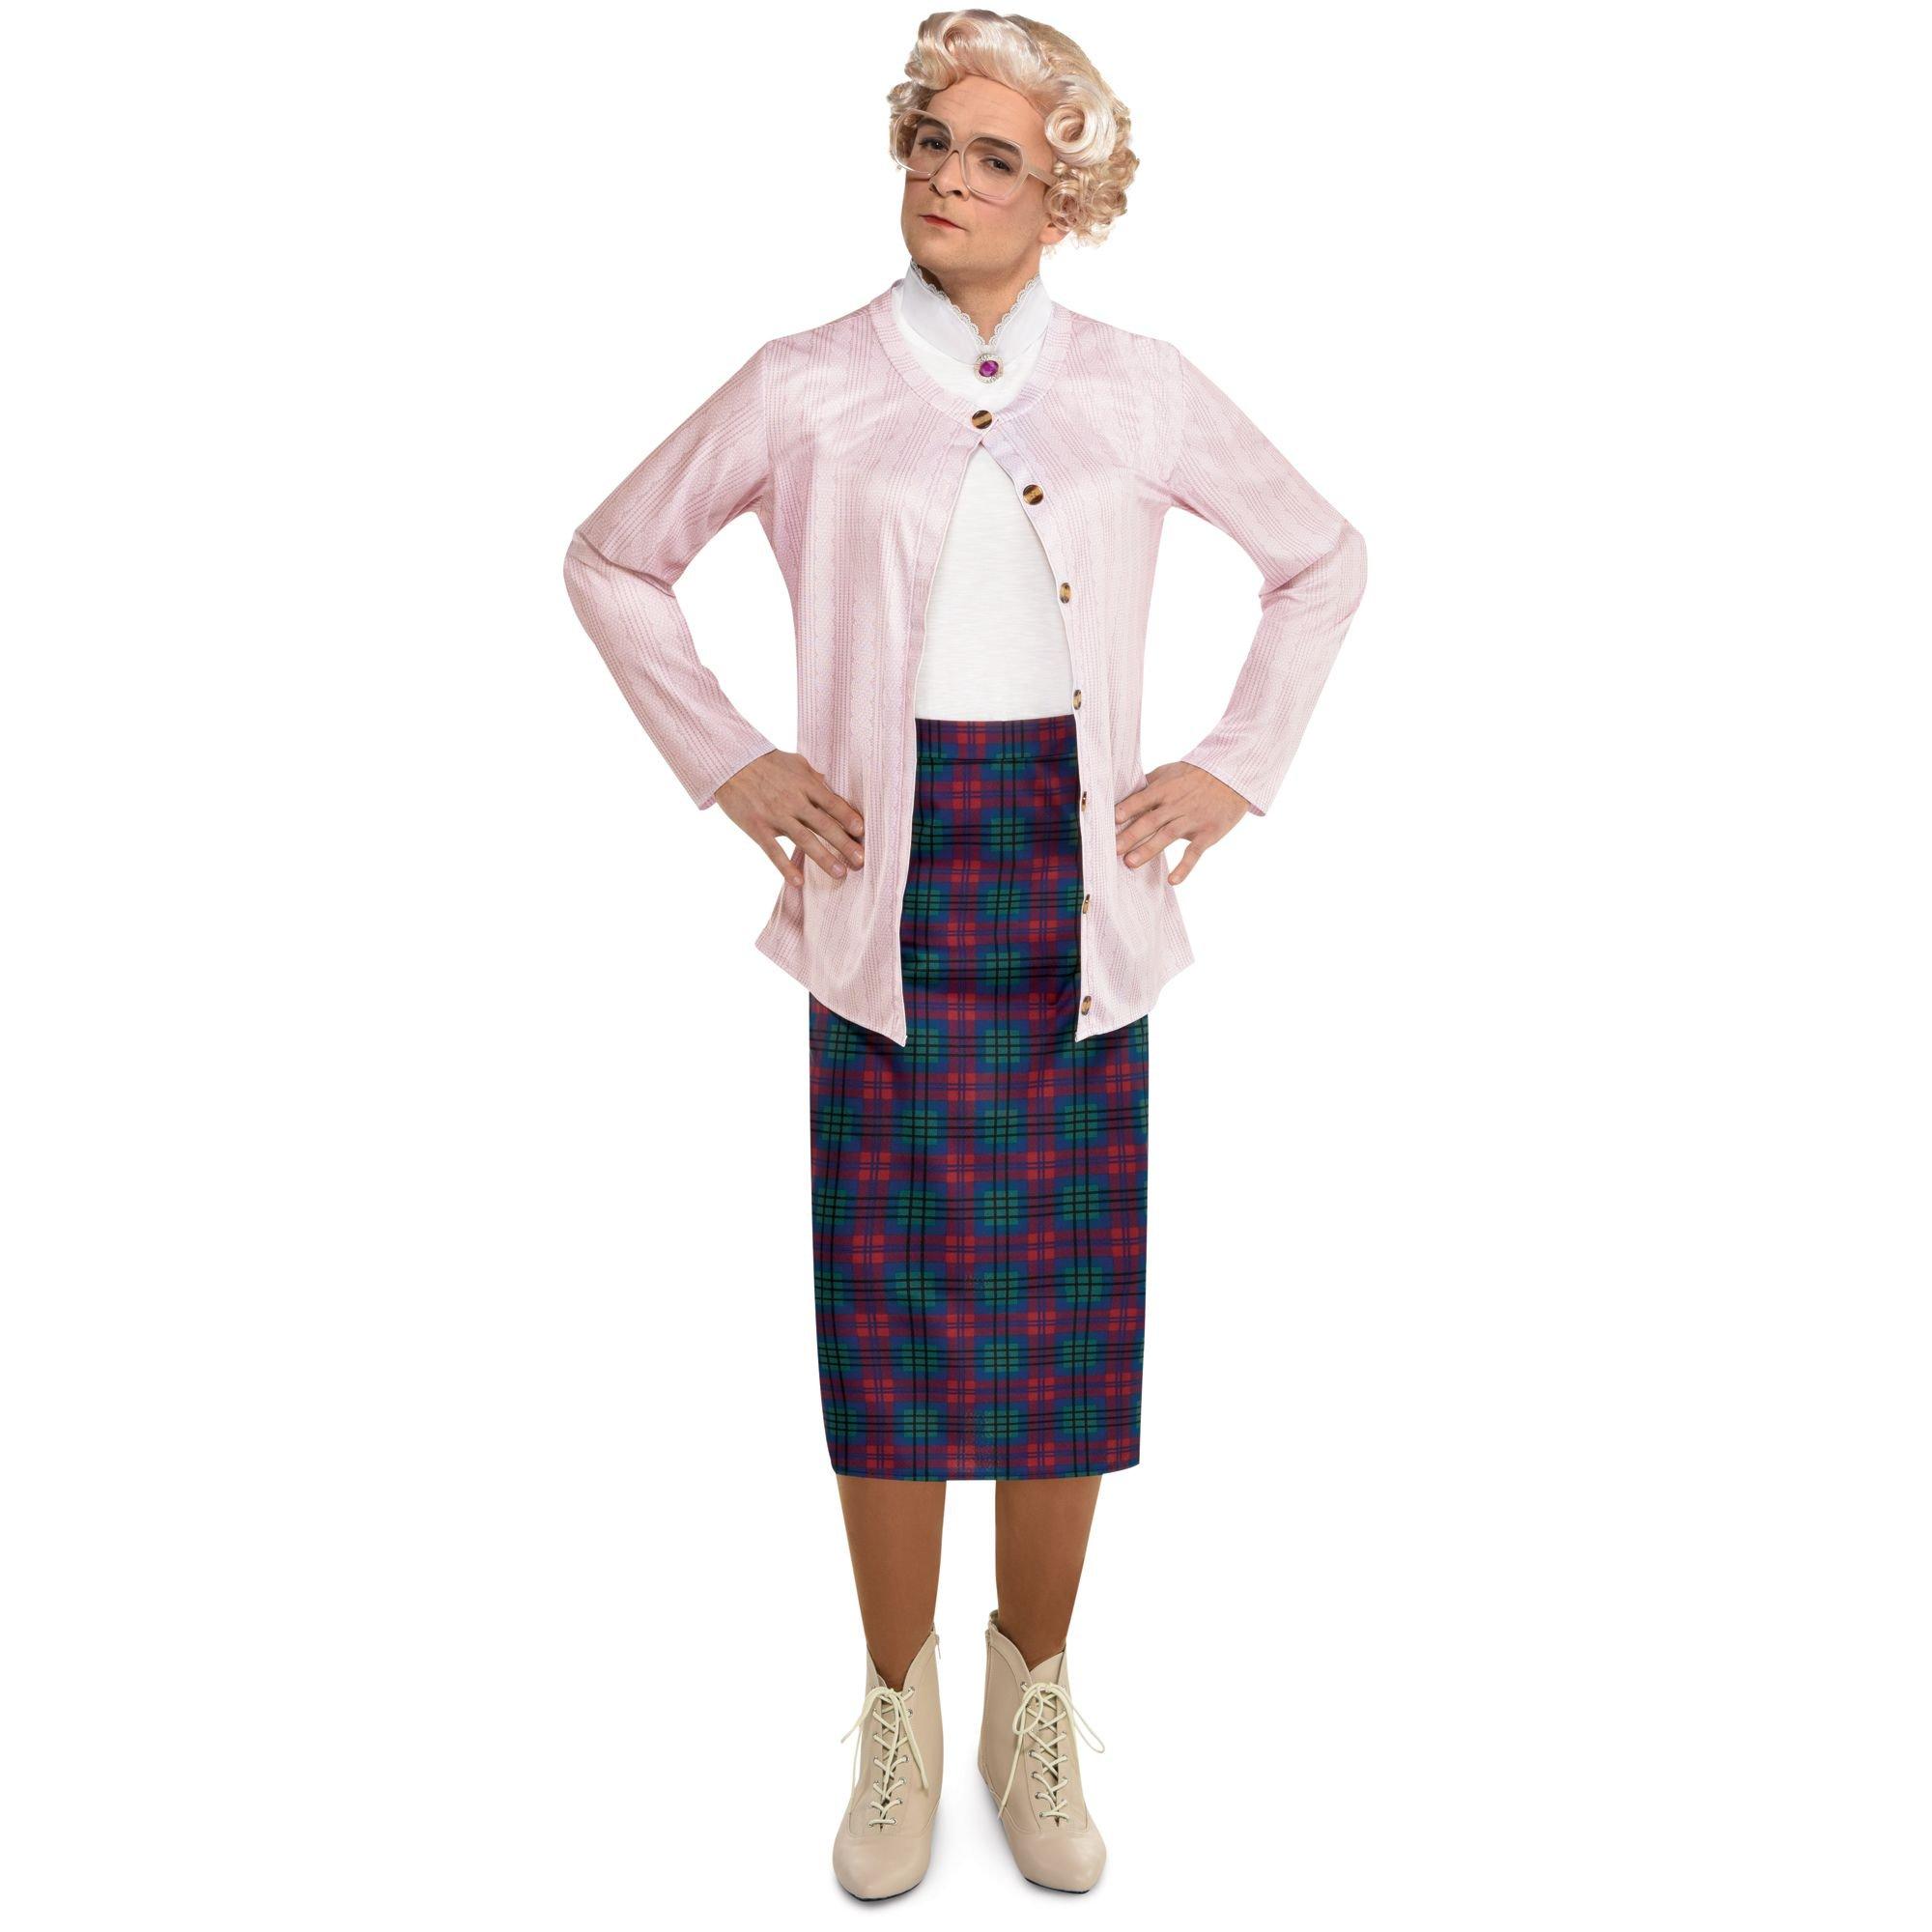 Mrs. Doubtfire Costume Kit for Adults